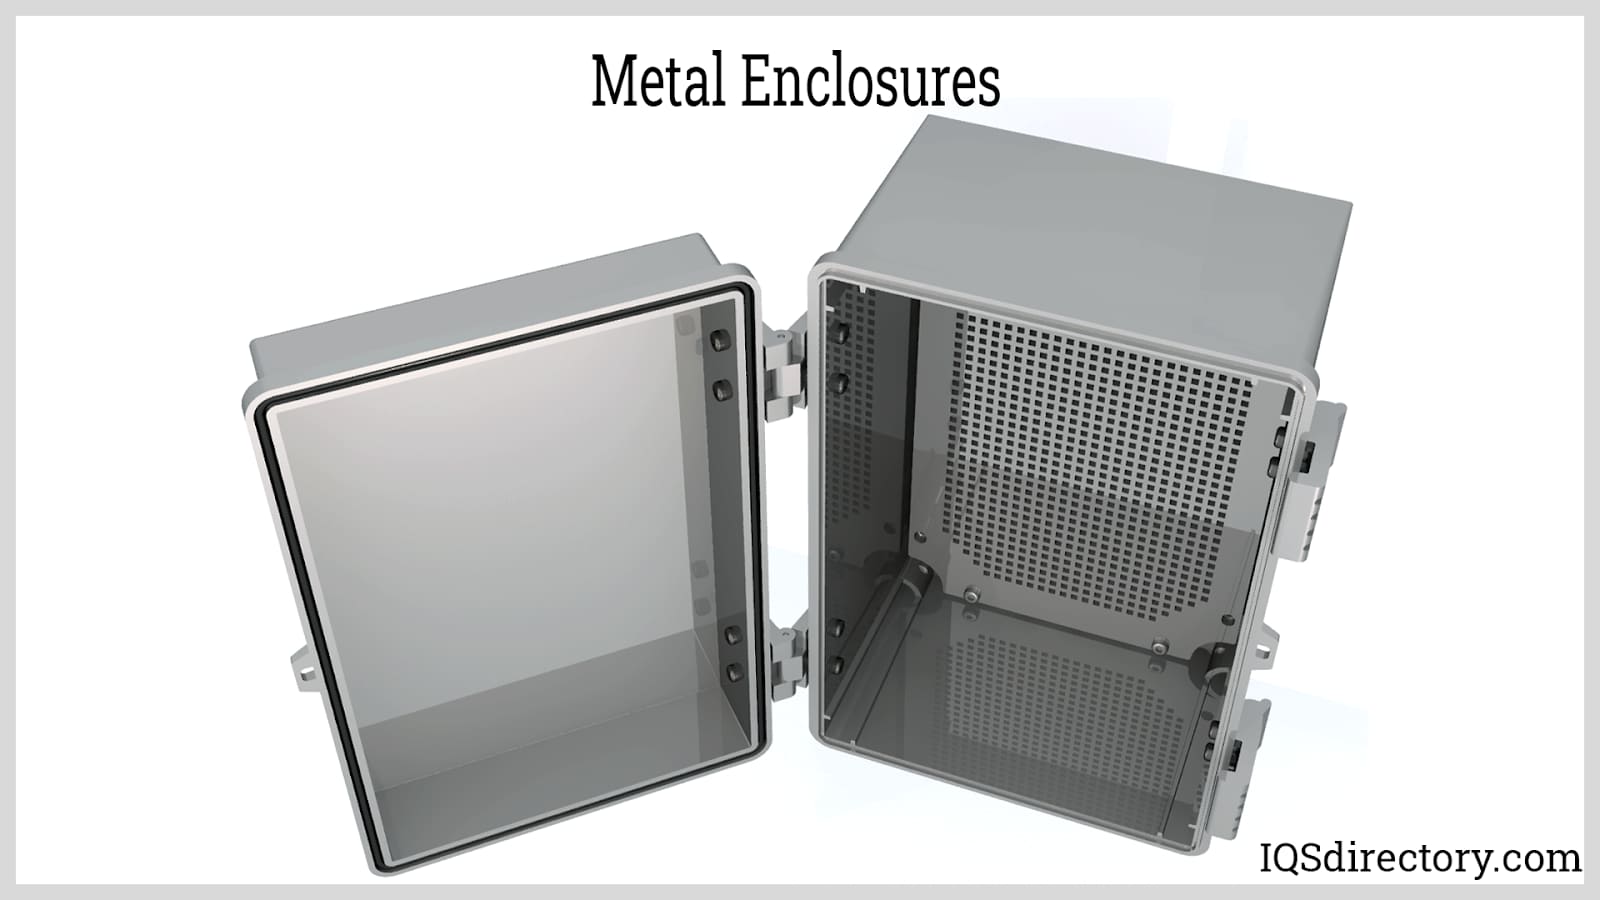 Small Metal Enclosures (Perfect for Electronics!)